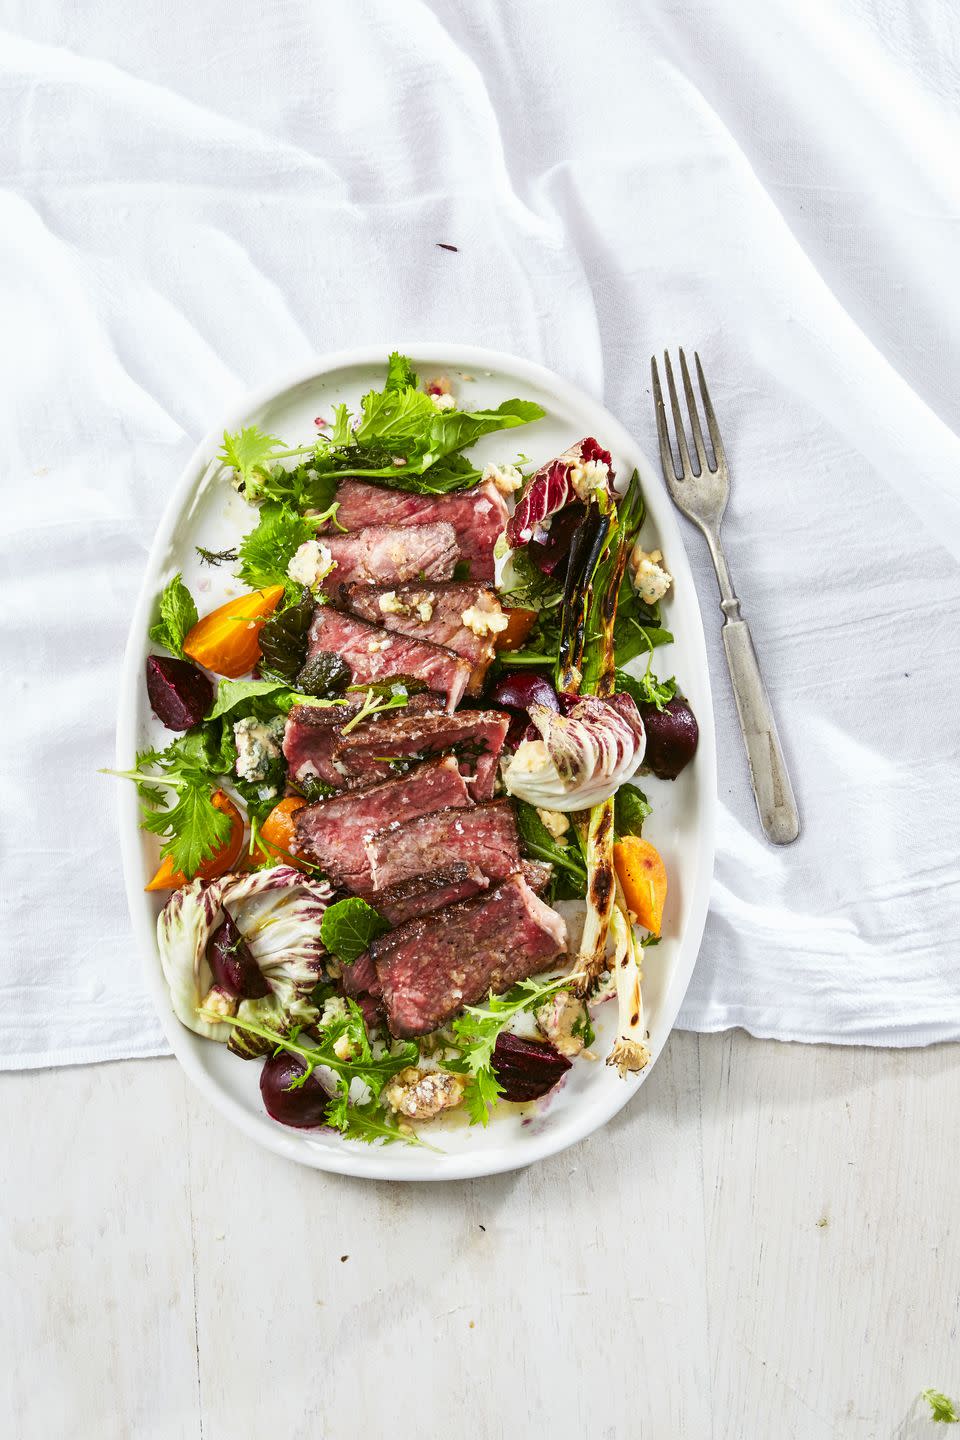 Steak Salad With Charred Green Onions and Beets